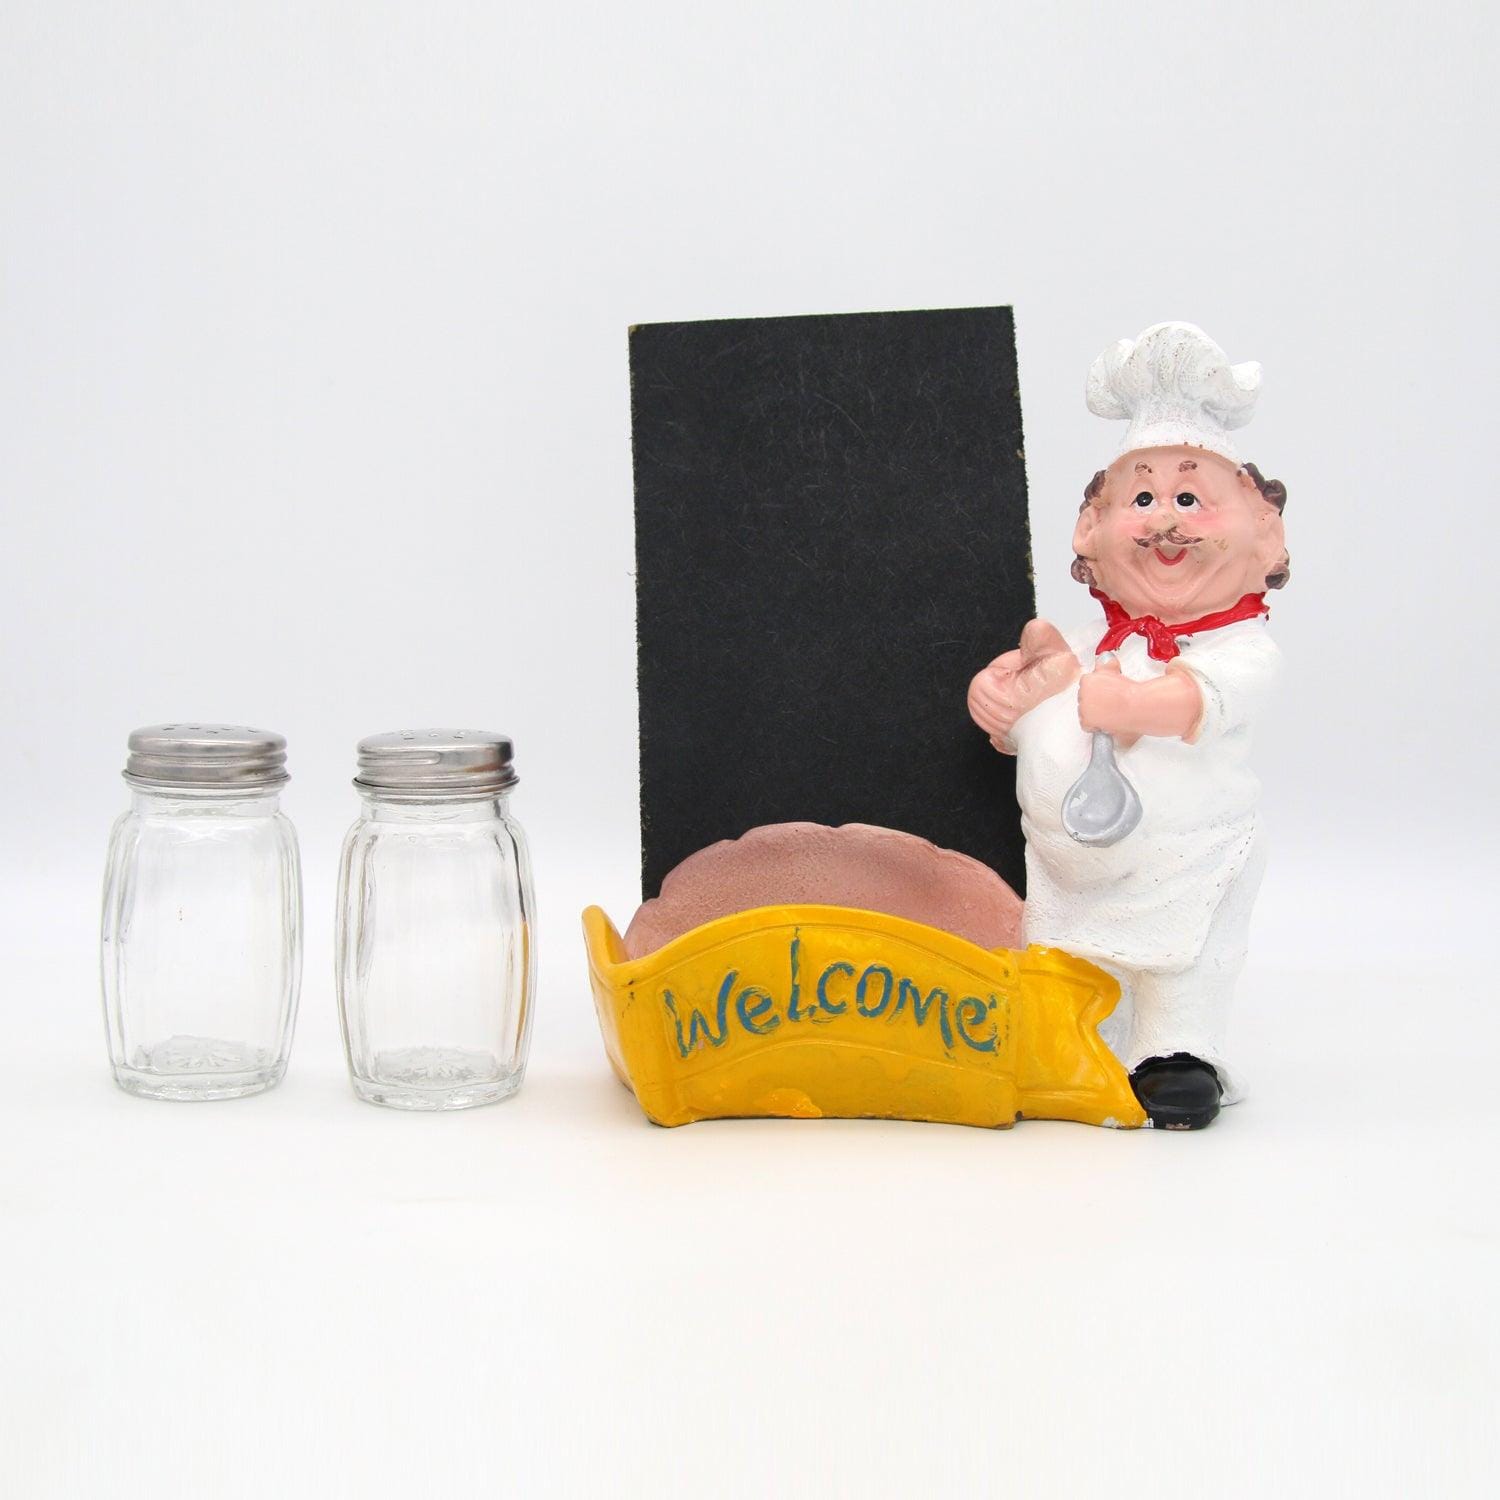 Cute Chef Figurine Resin Salt & Pepper Shakers with Chalkboard Holder Set (Yellow Basket)